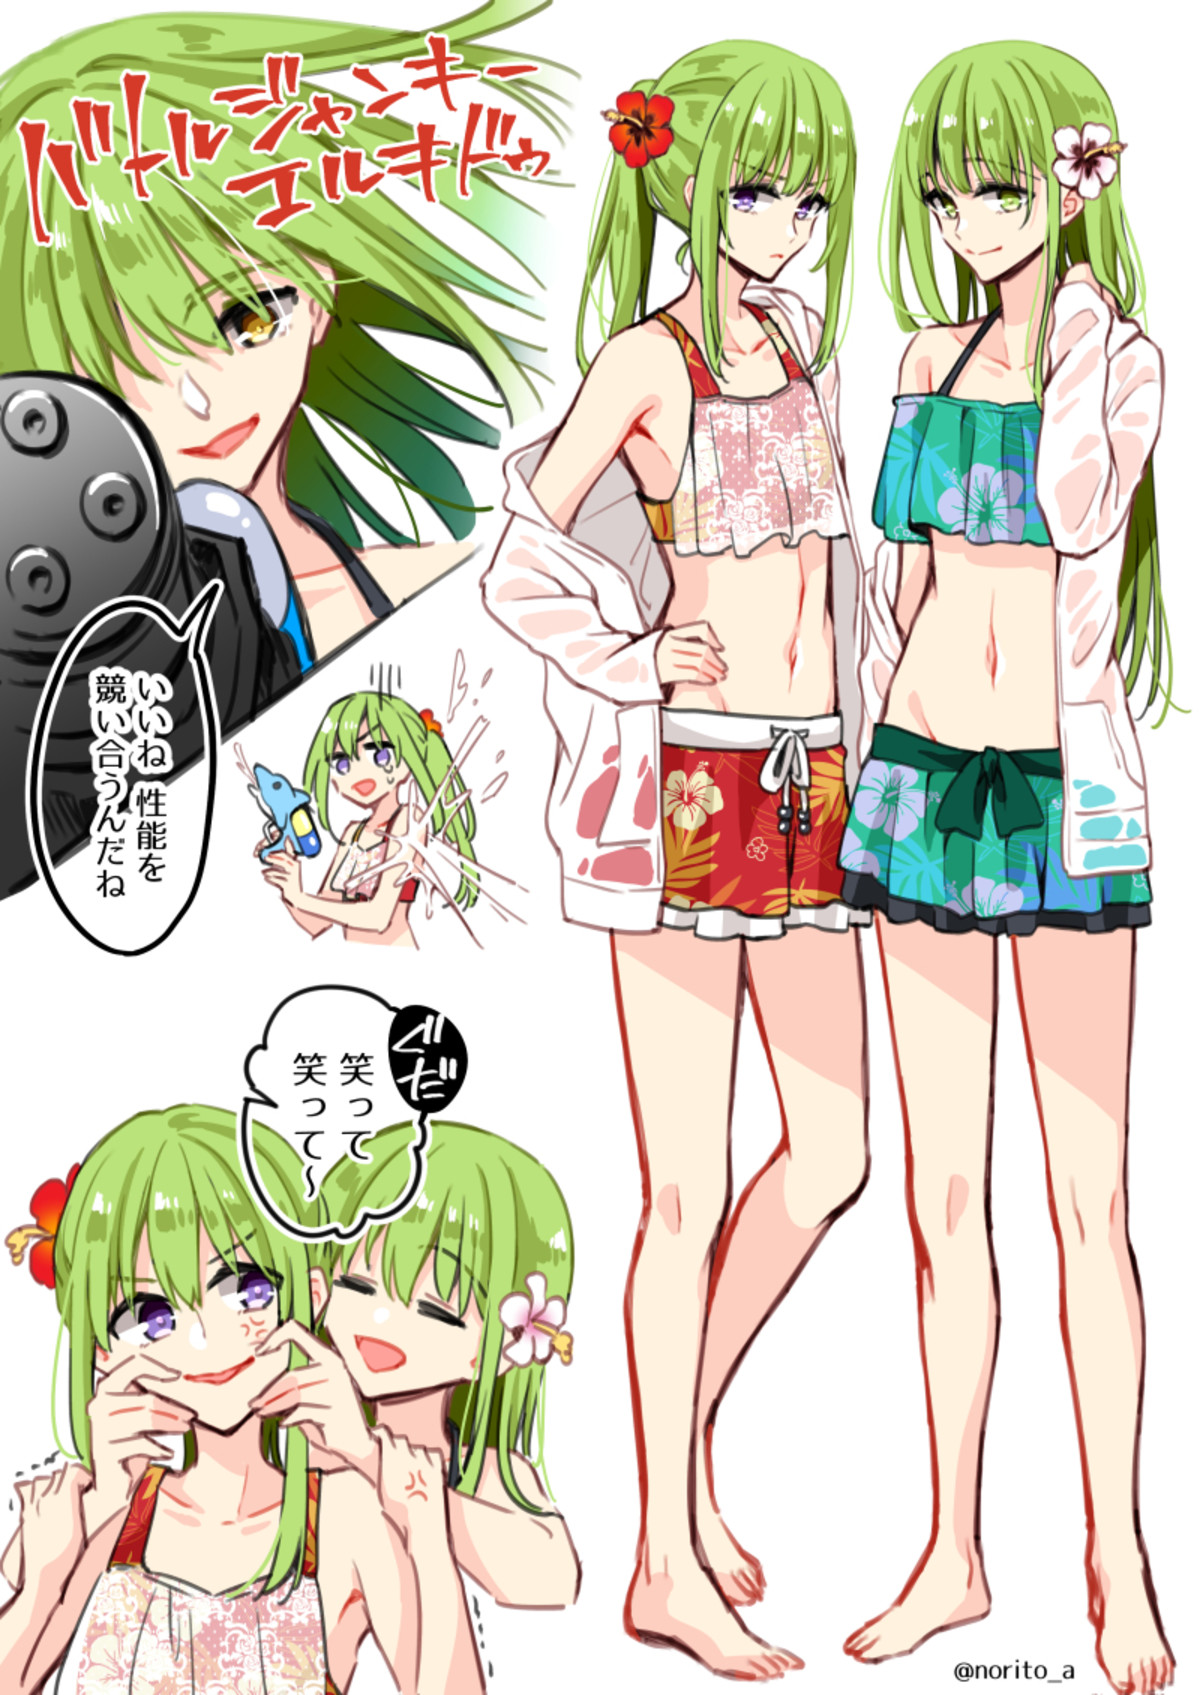 Summer Enkidu & Kingu. Artist is Norito A join list: TrapWaifu (270 subs)Mention History join list:. It's not gay if it's clay